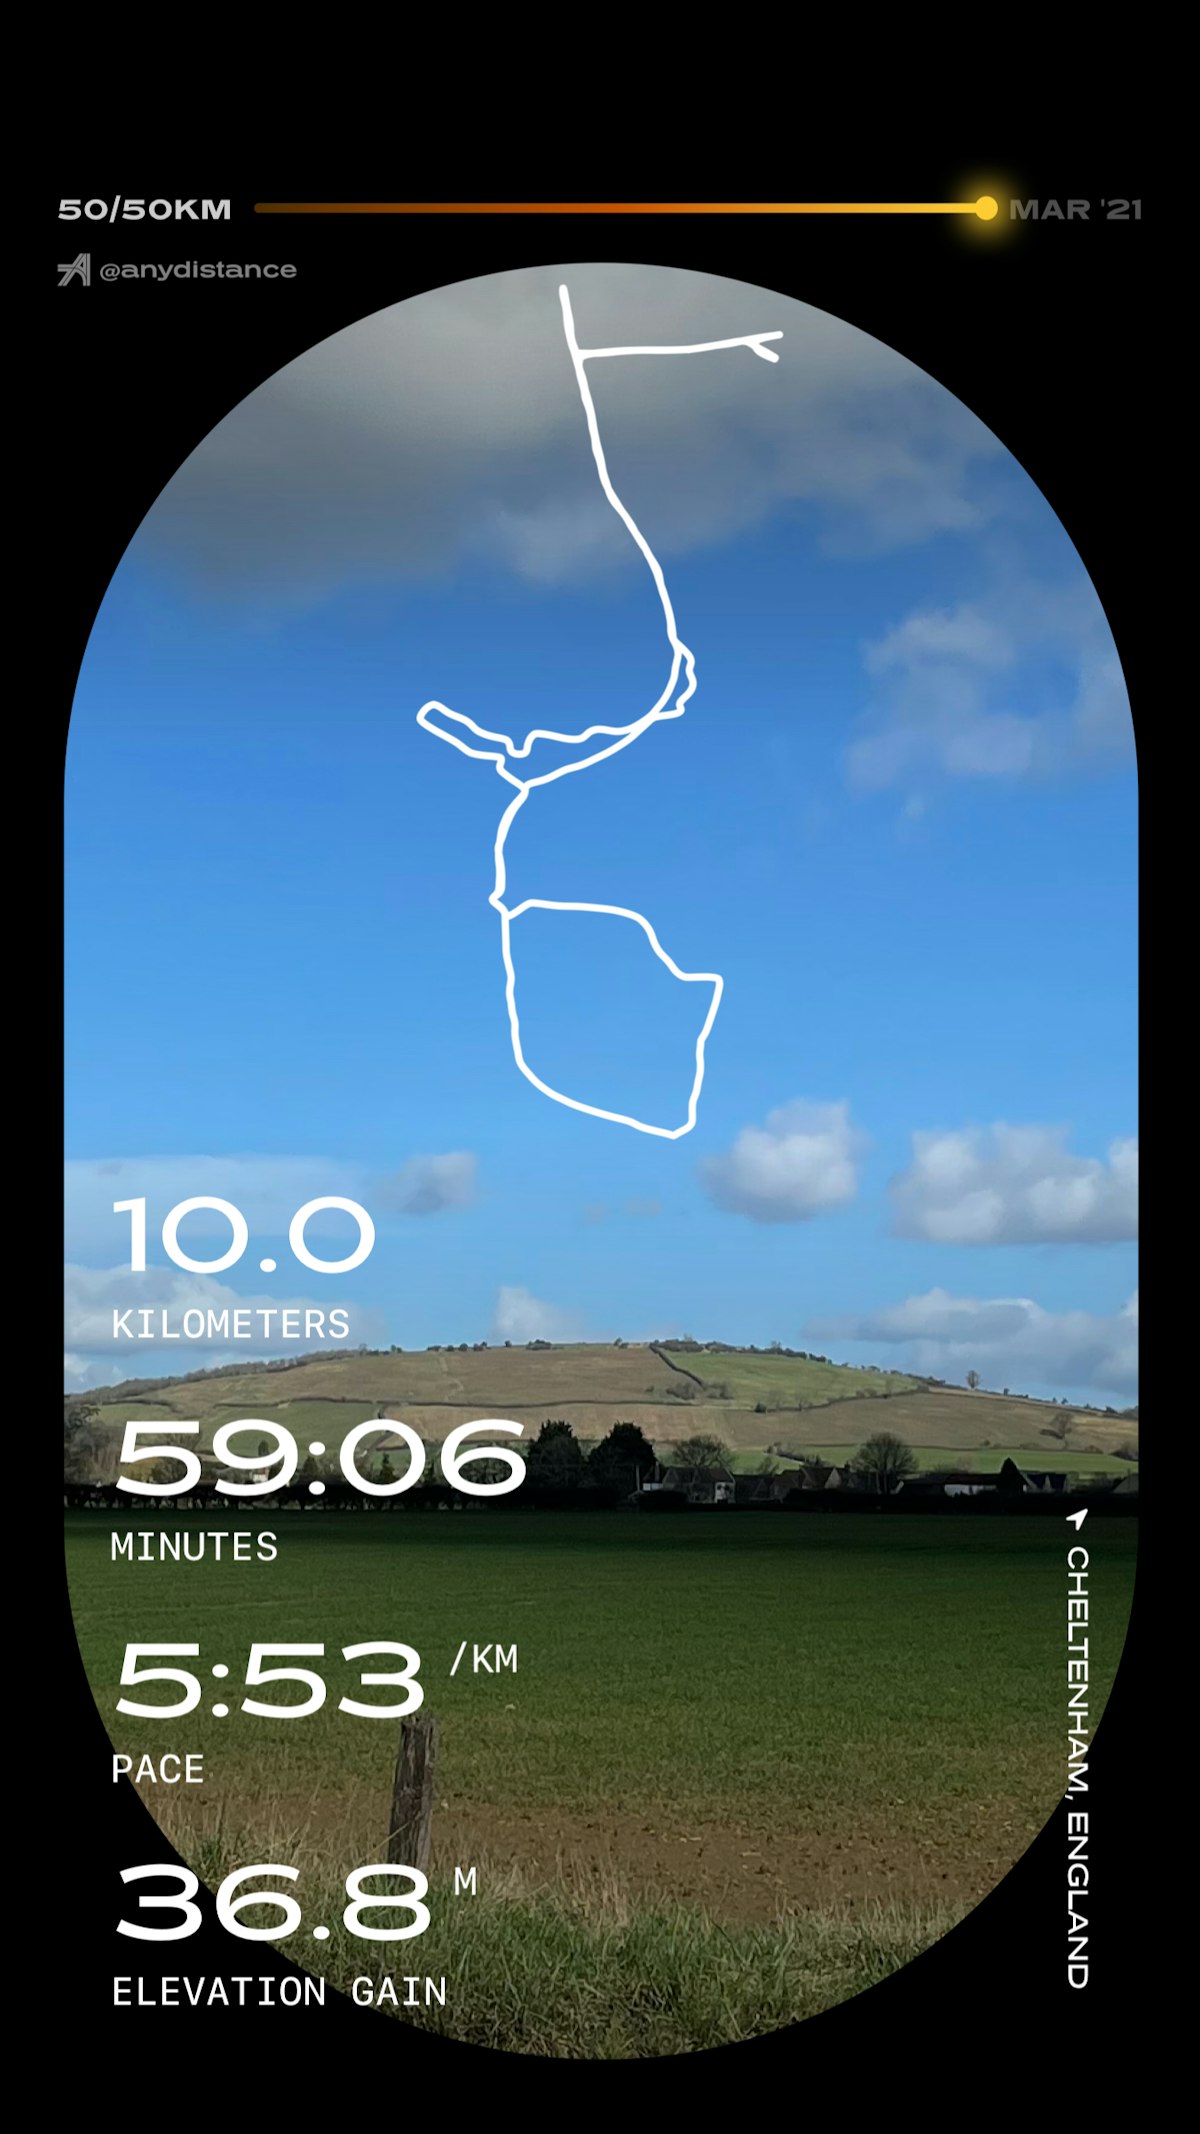 A route map and stats from my 10k run today